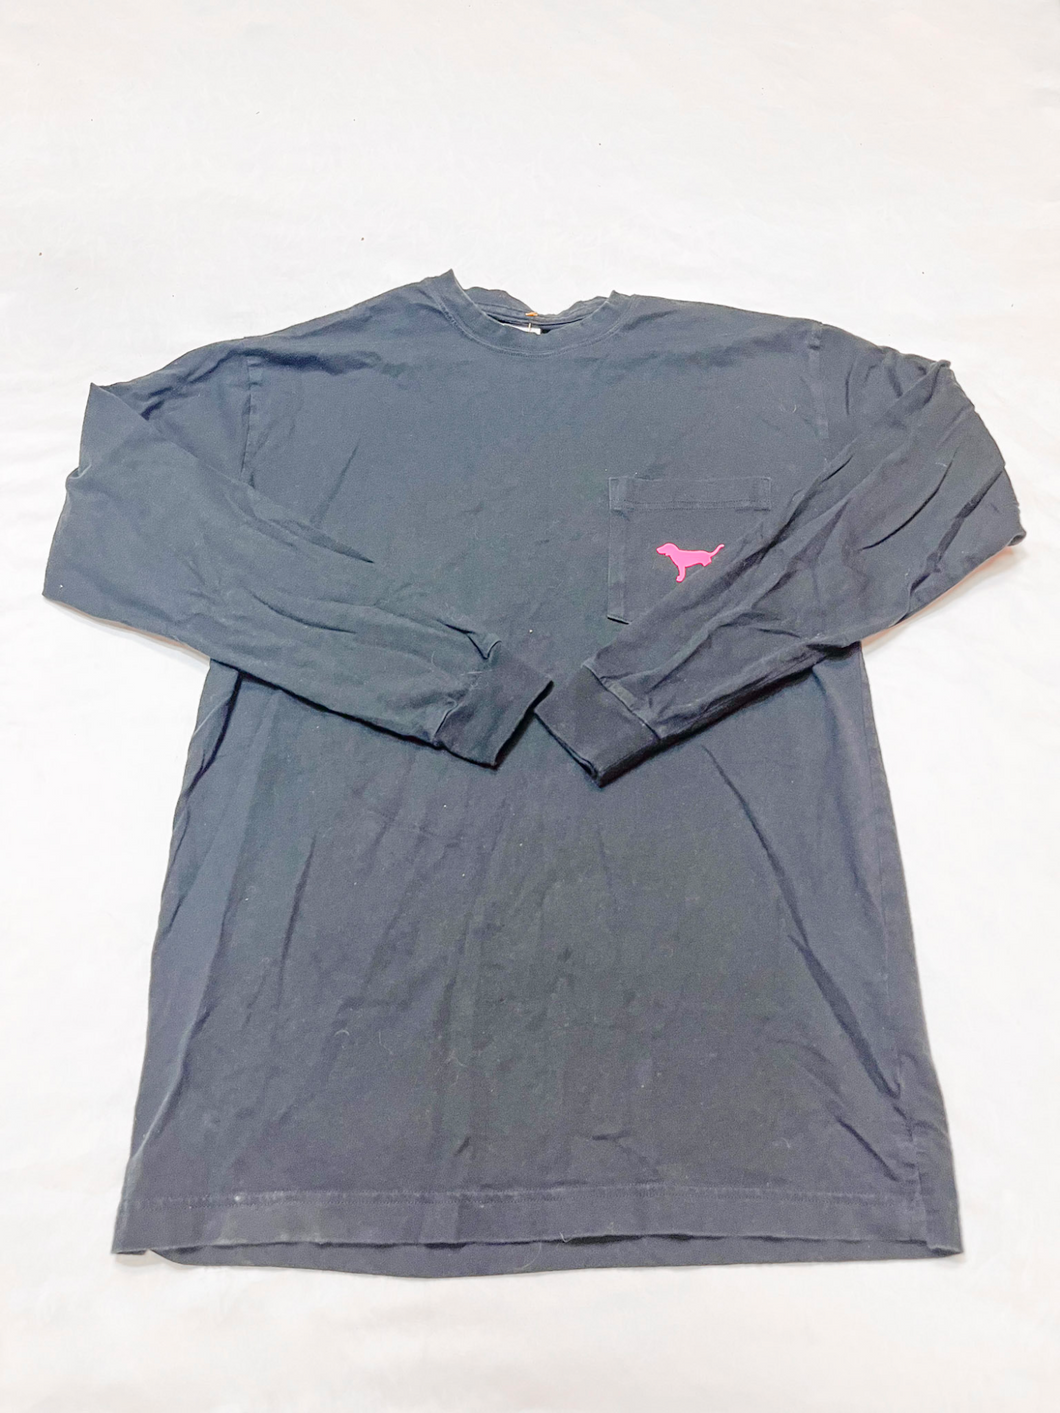 Pink By Victoria's Secret Long Sleeve T-Shirt Size Extra Small * - Plato's Closet Morgantown, WV